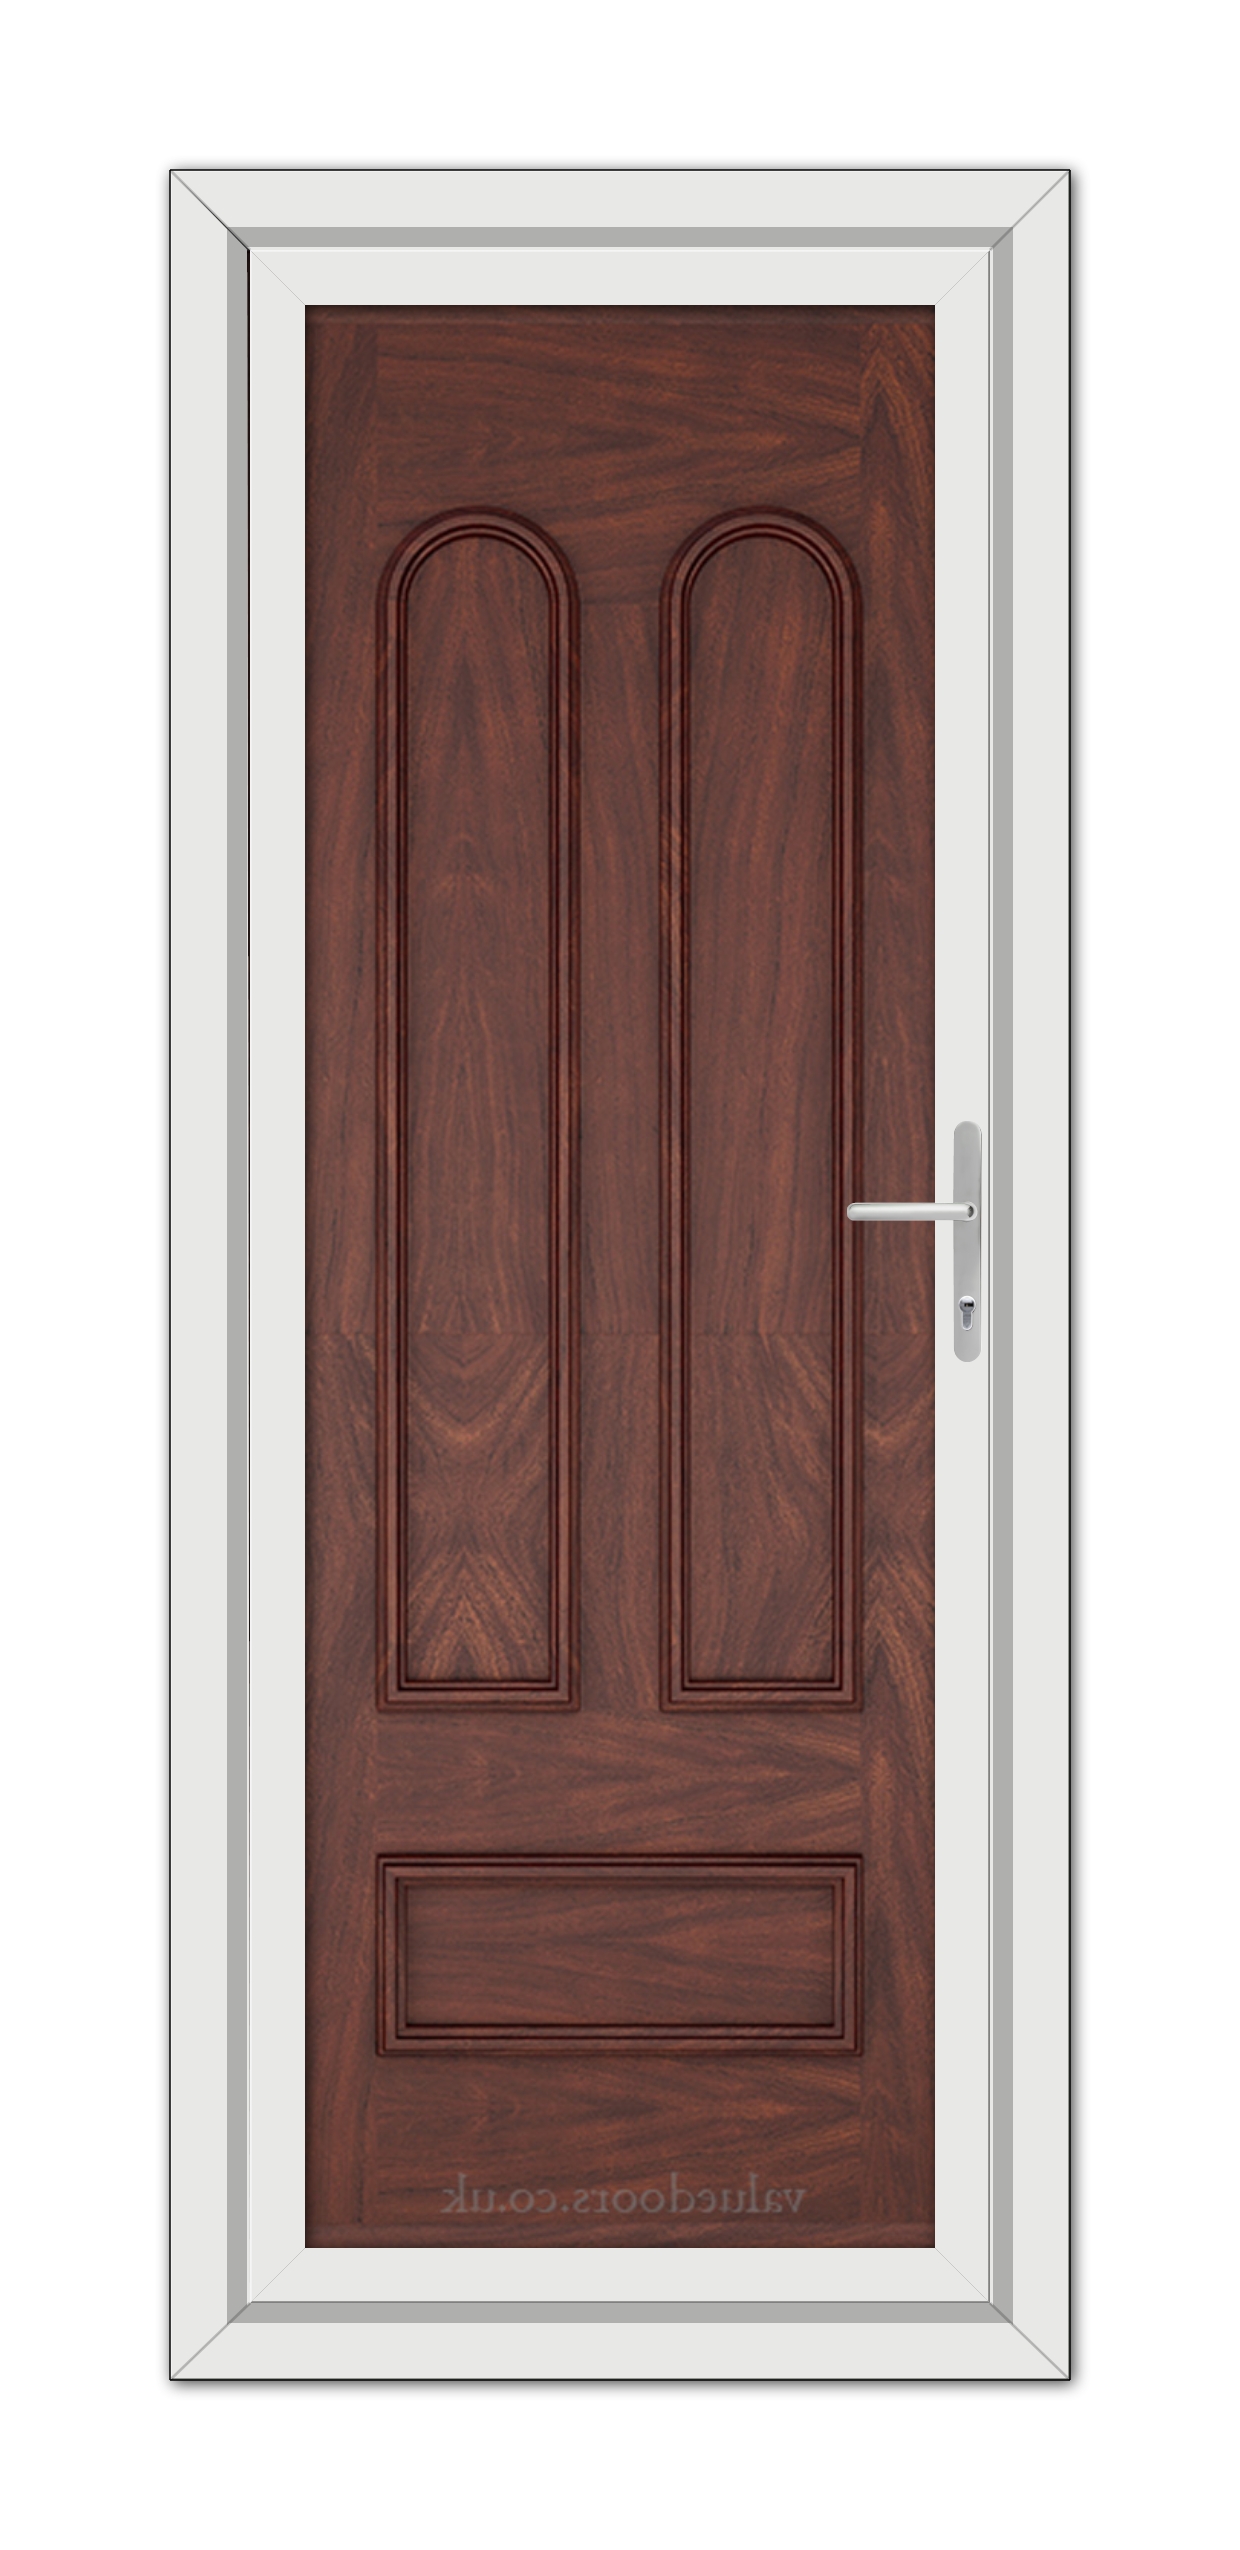 A close-up of a Rosewood Madrid Solid uPVC Door.